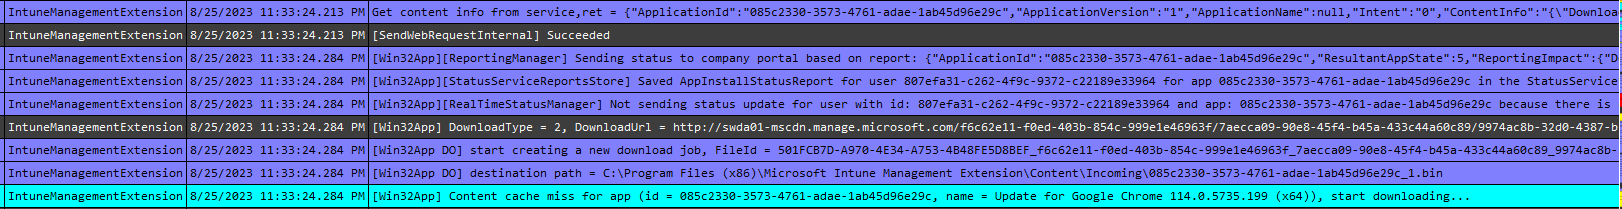 Intune Win32app installation as shown by the IME log